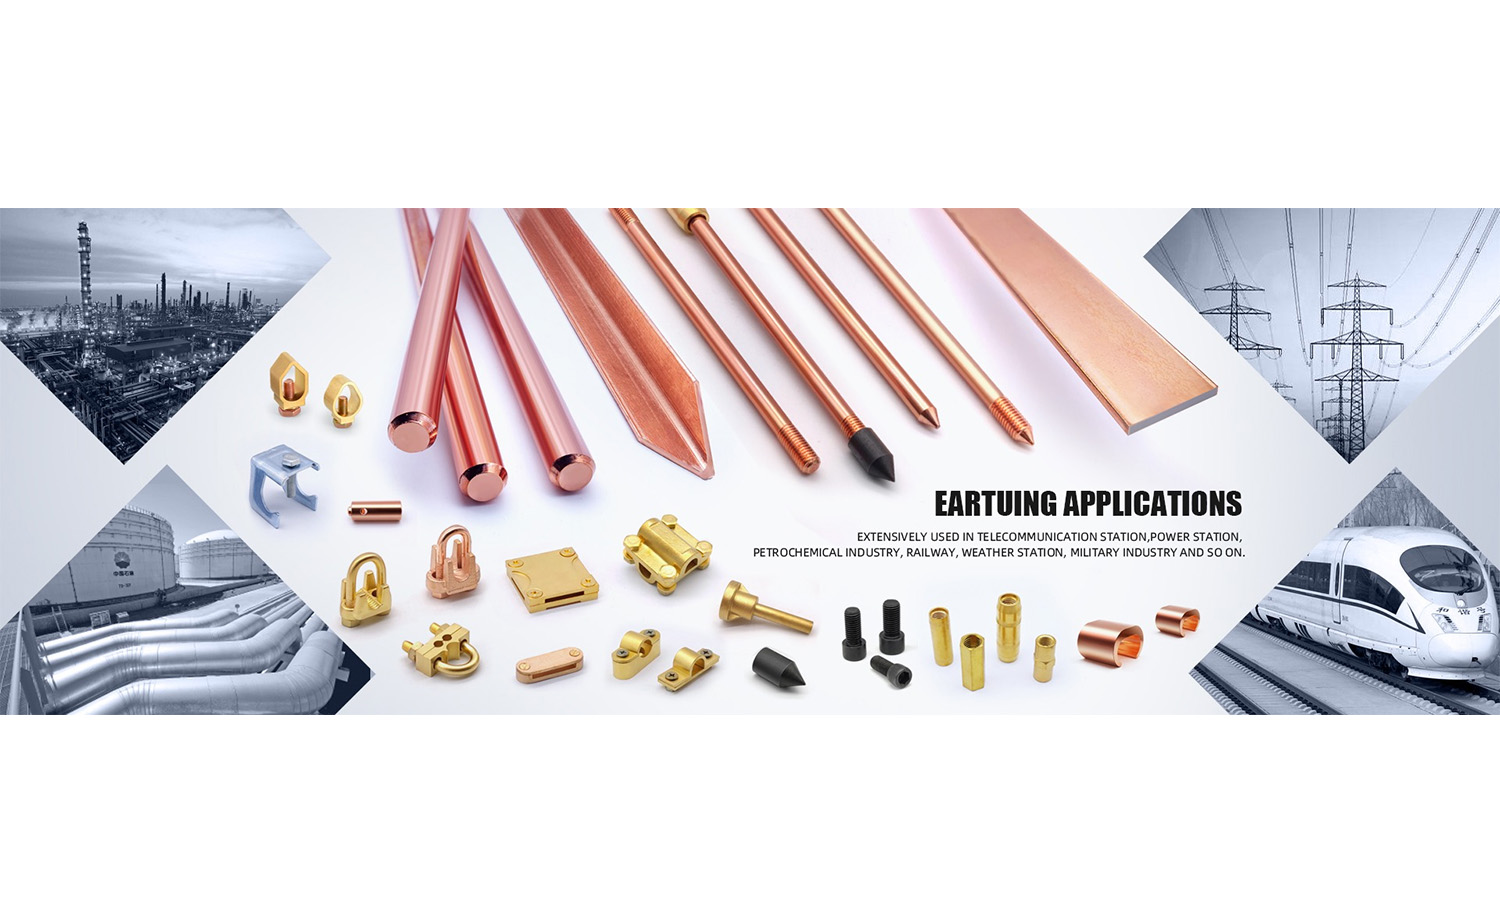 Earthing Rod and Accessory